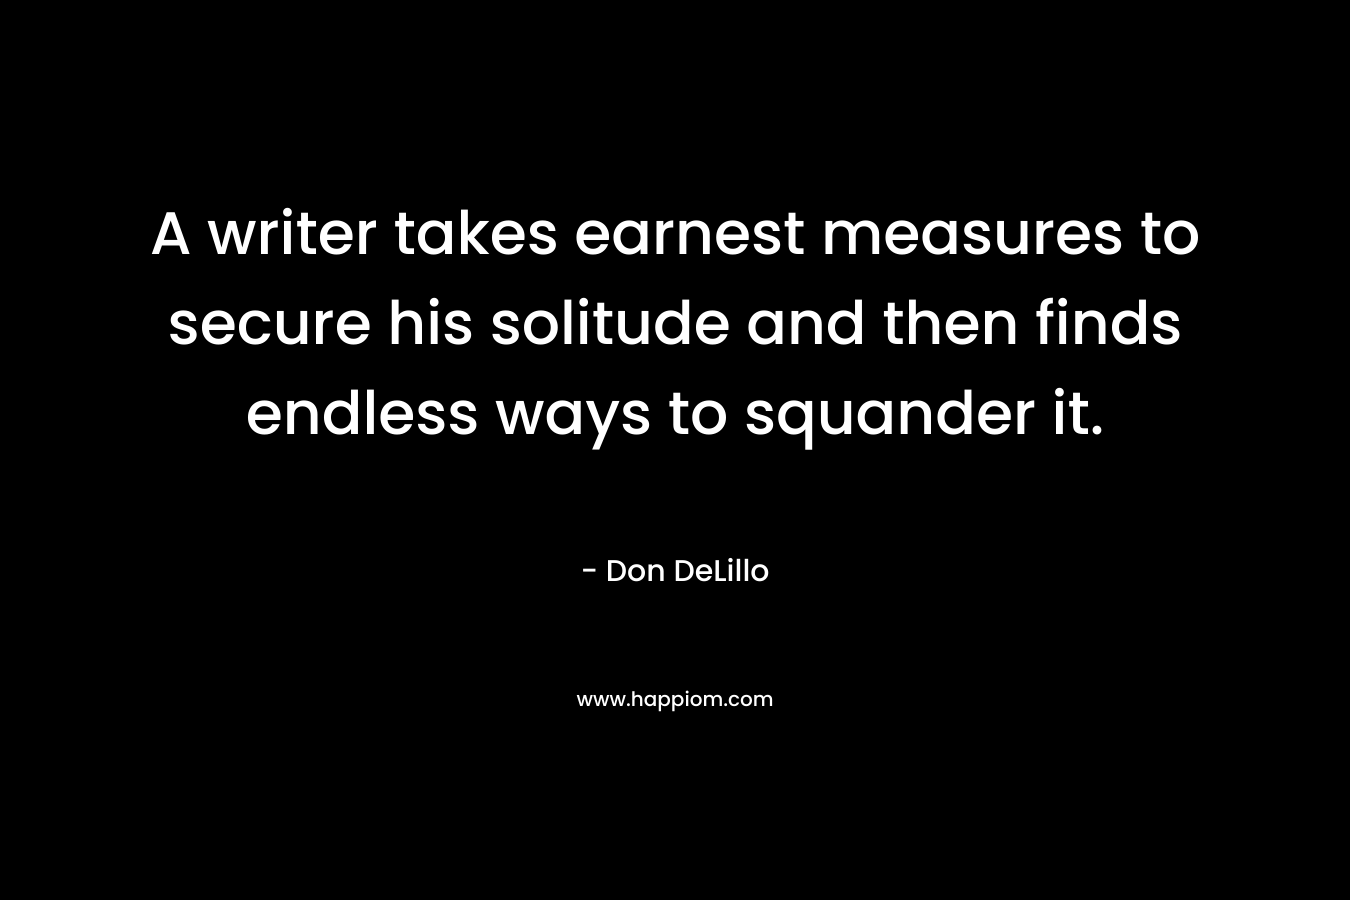 A writer takes earnest measures to secure his solitude and then finds endless ways to squander it. – Don DeLillo